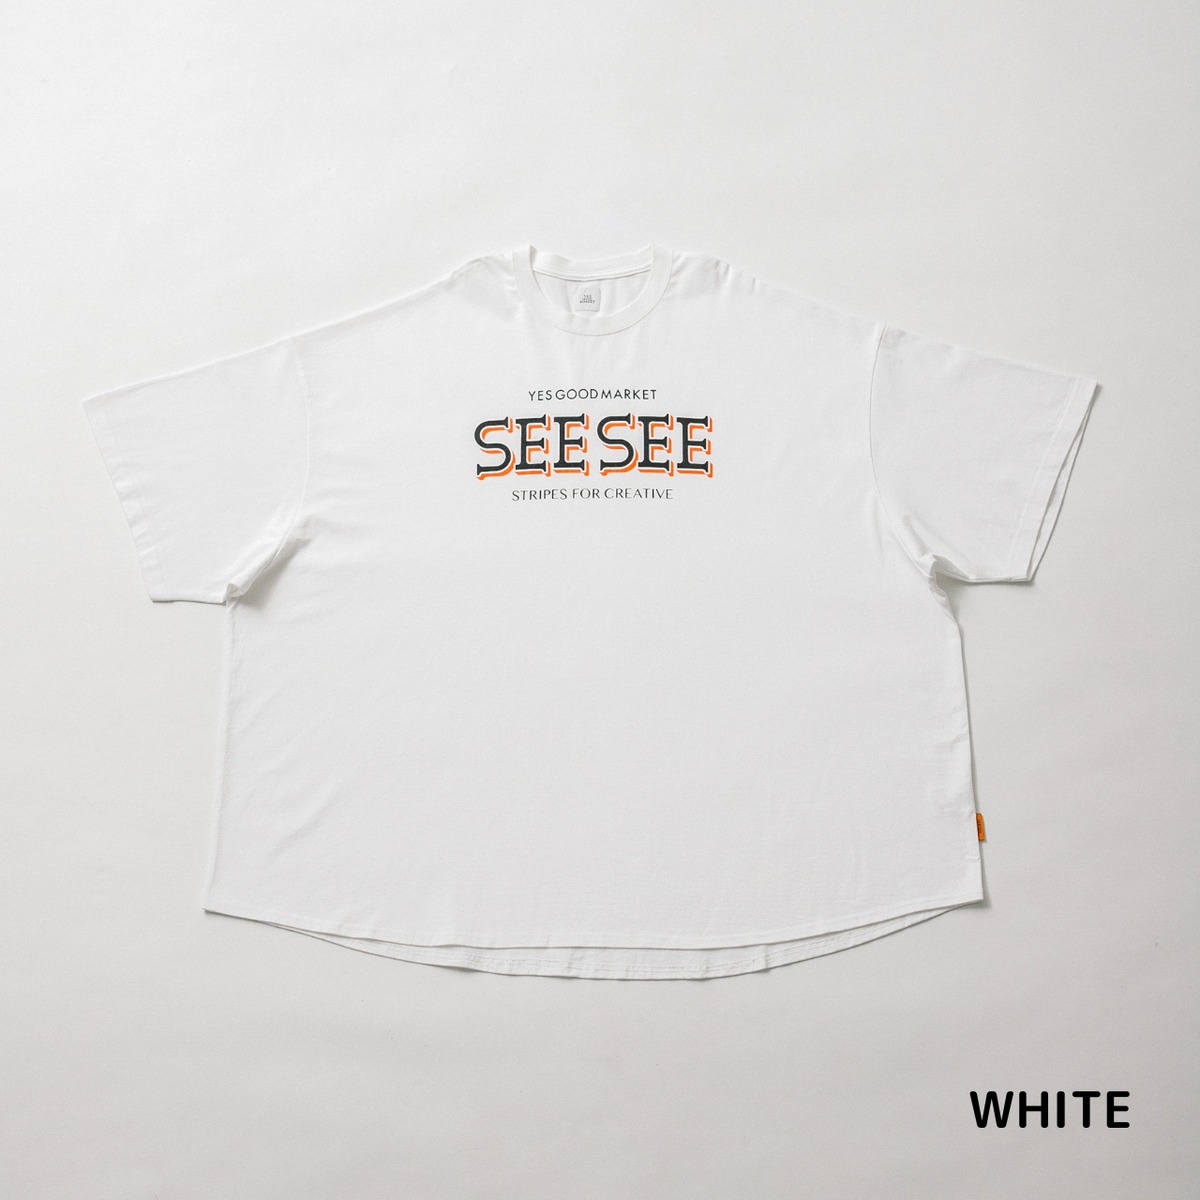 YGM×SEE SEE×S.F.C SUPER BIG ROUND TEE | Yes Good Market ONLINE powered by  BASE